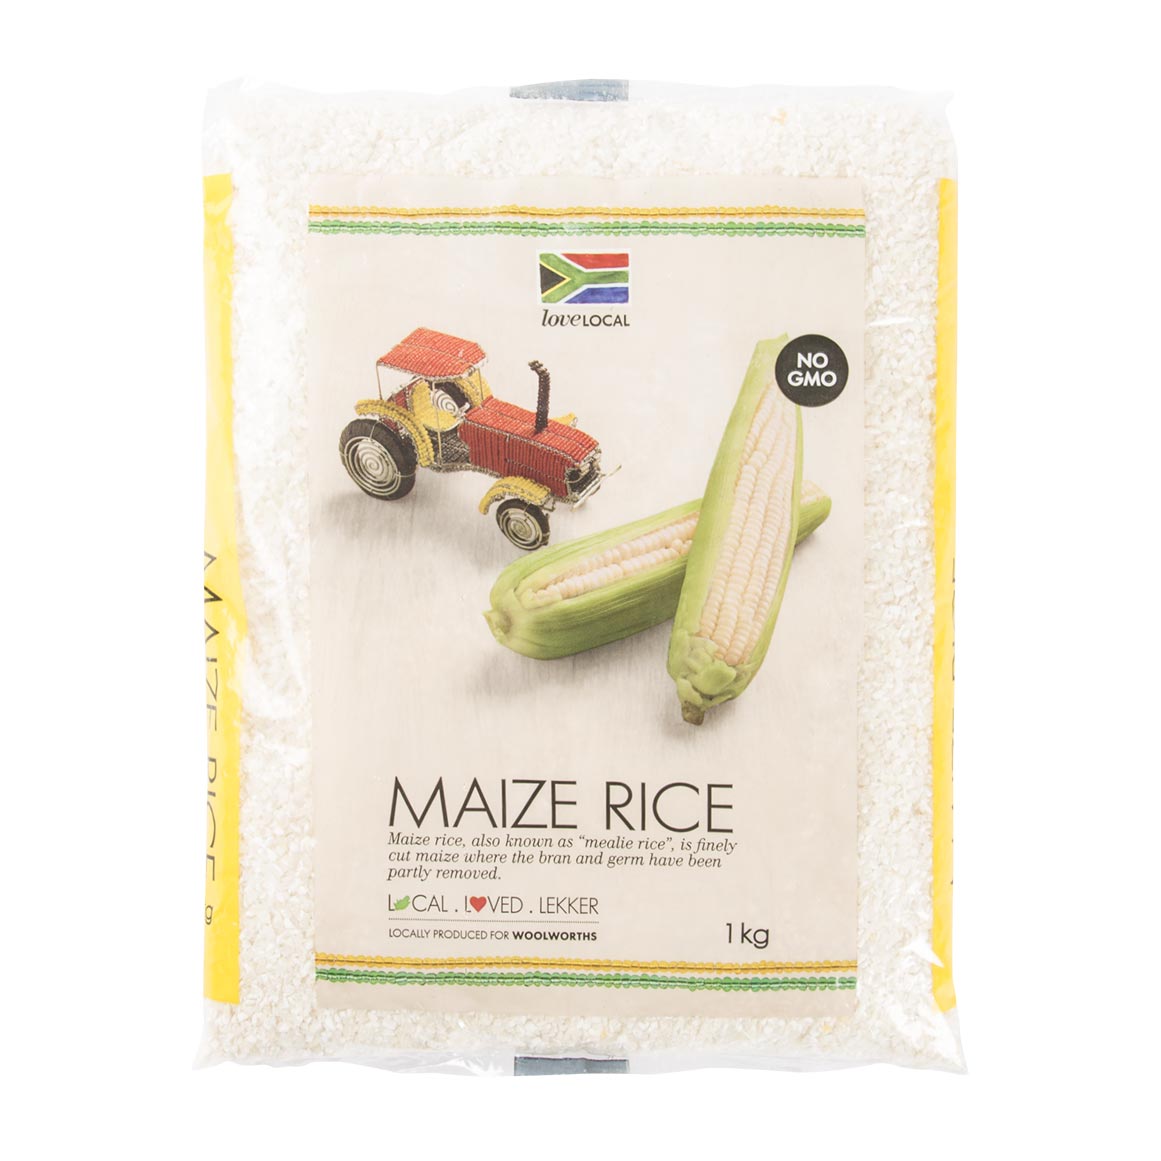 WOOLWORTHS MAIZE RICE 1KG